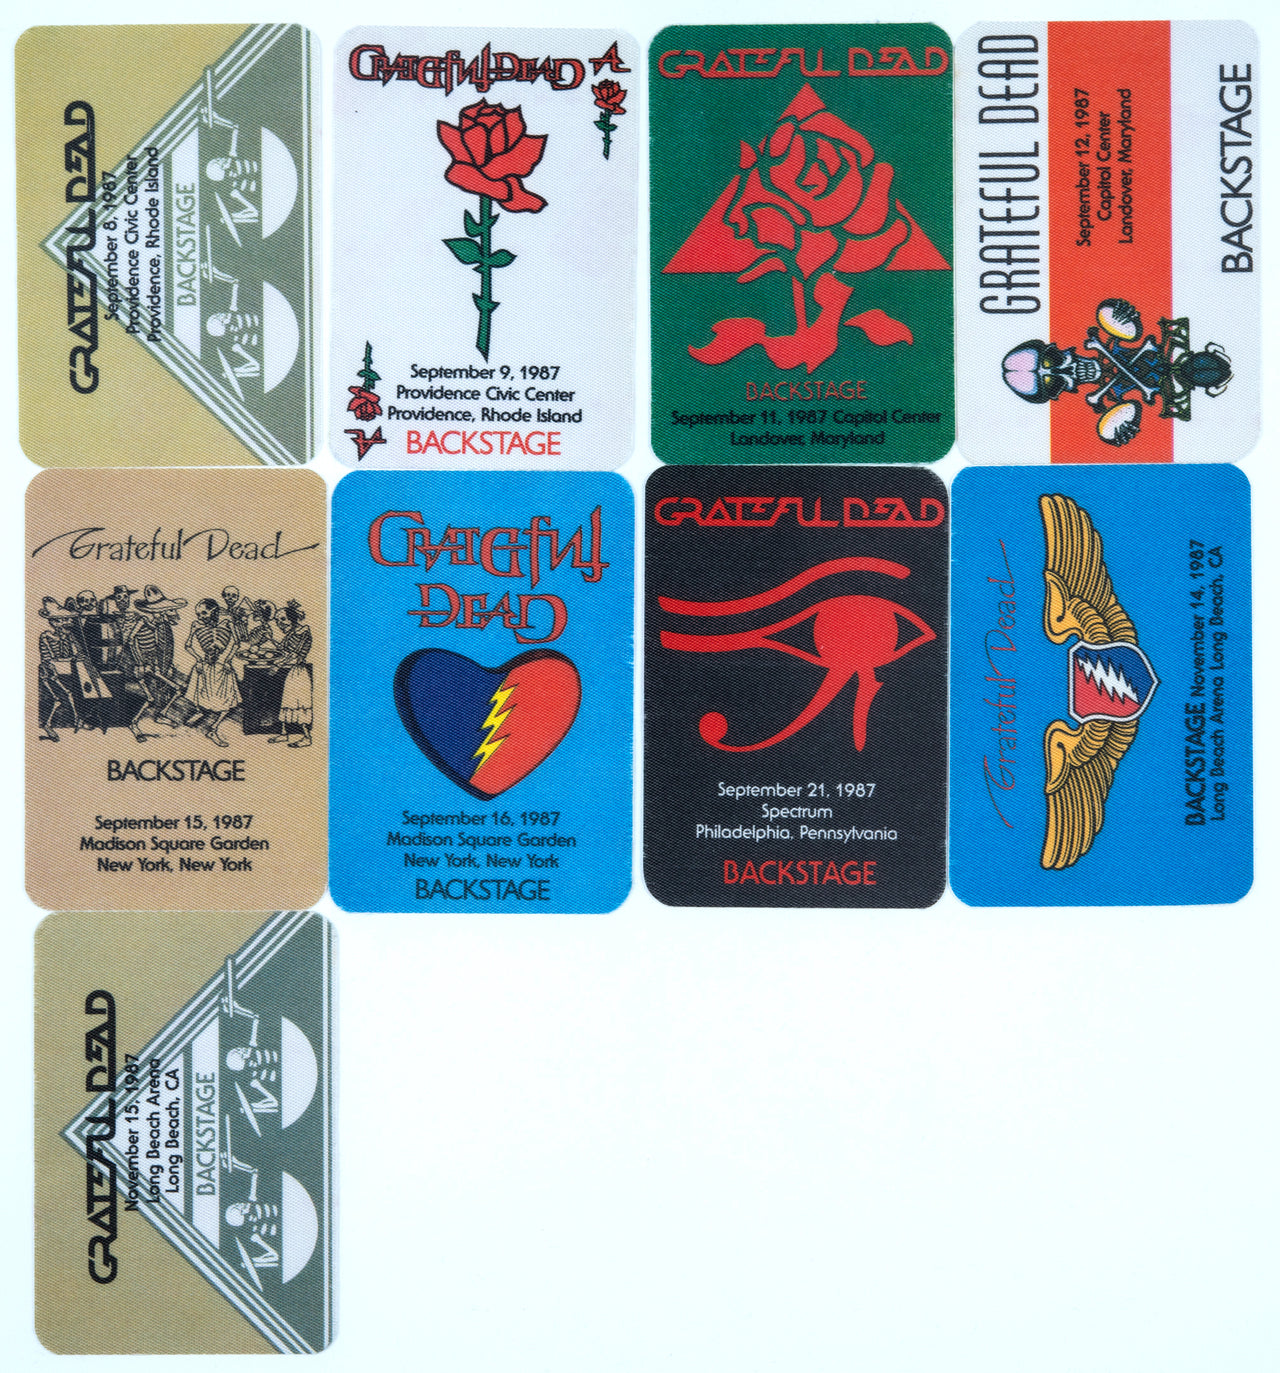 Grateful Dead Backstage Passes (9/8/1987 - 11/15/1987) from Dan Healy